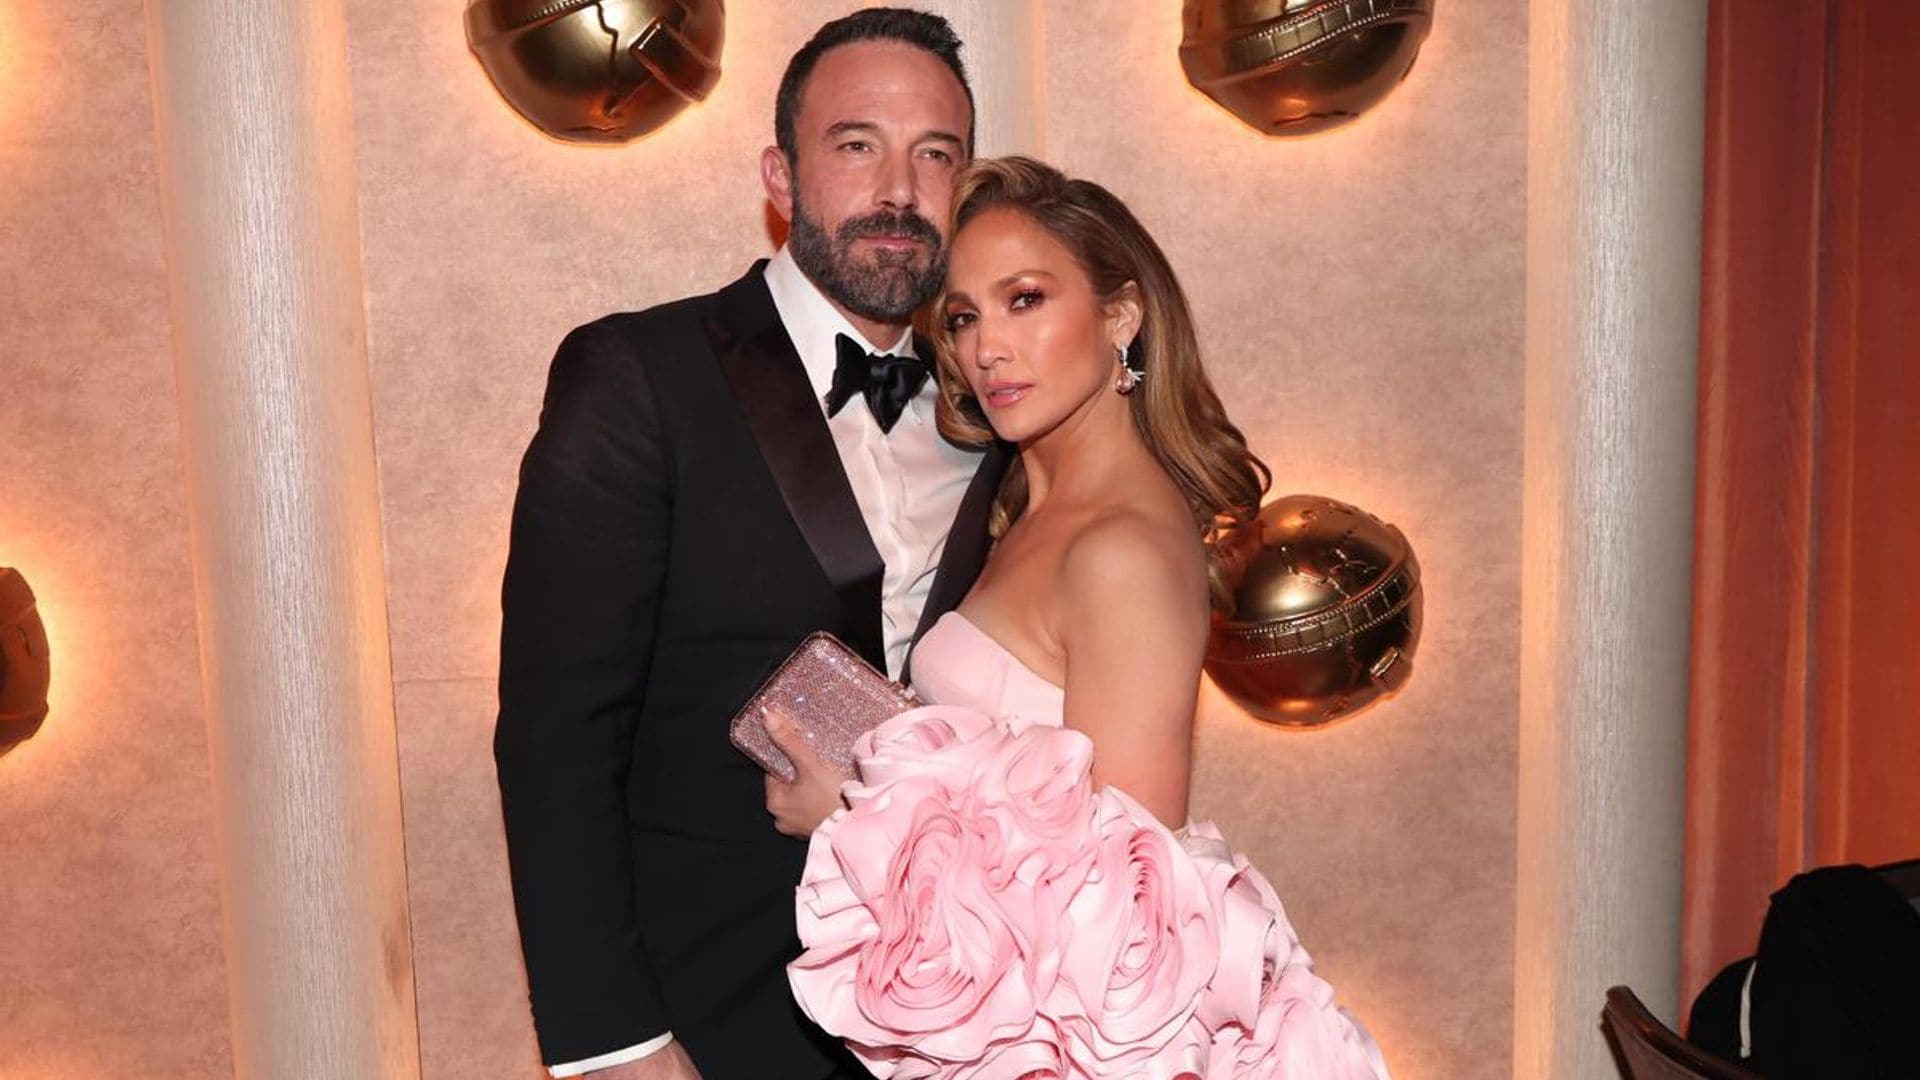 Ben Affleck and Jennifer Lopez reveal why they canceled their 2003 wedding